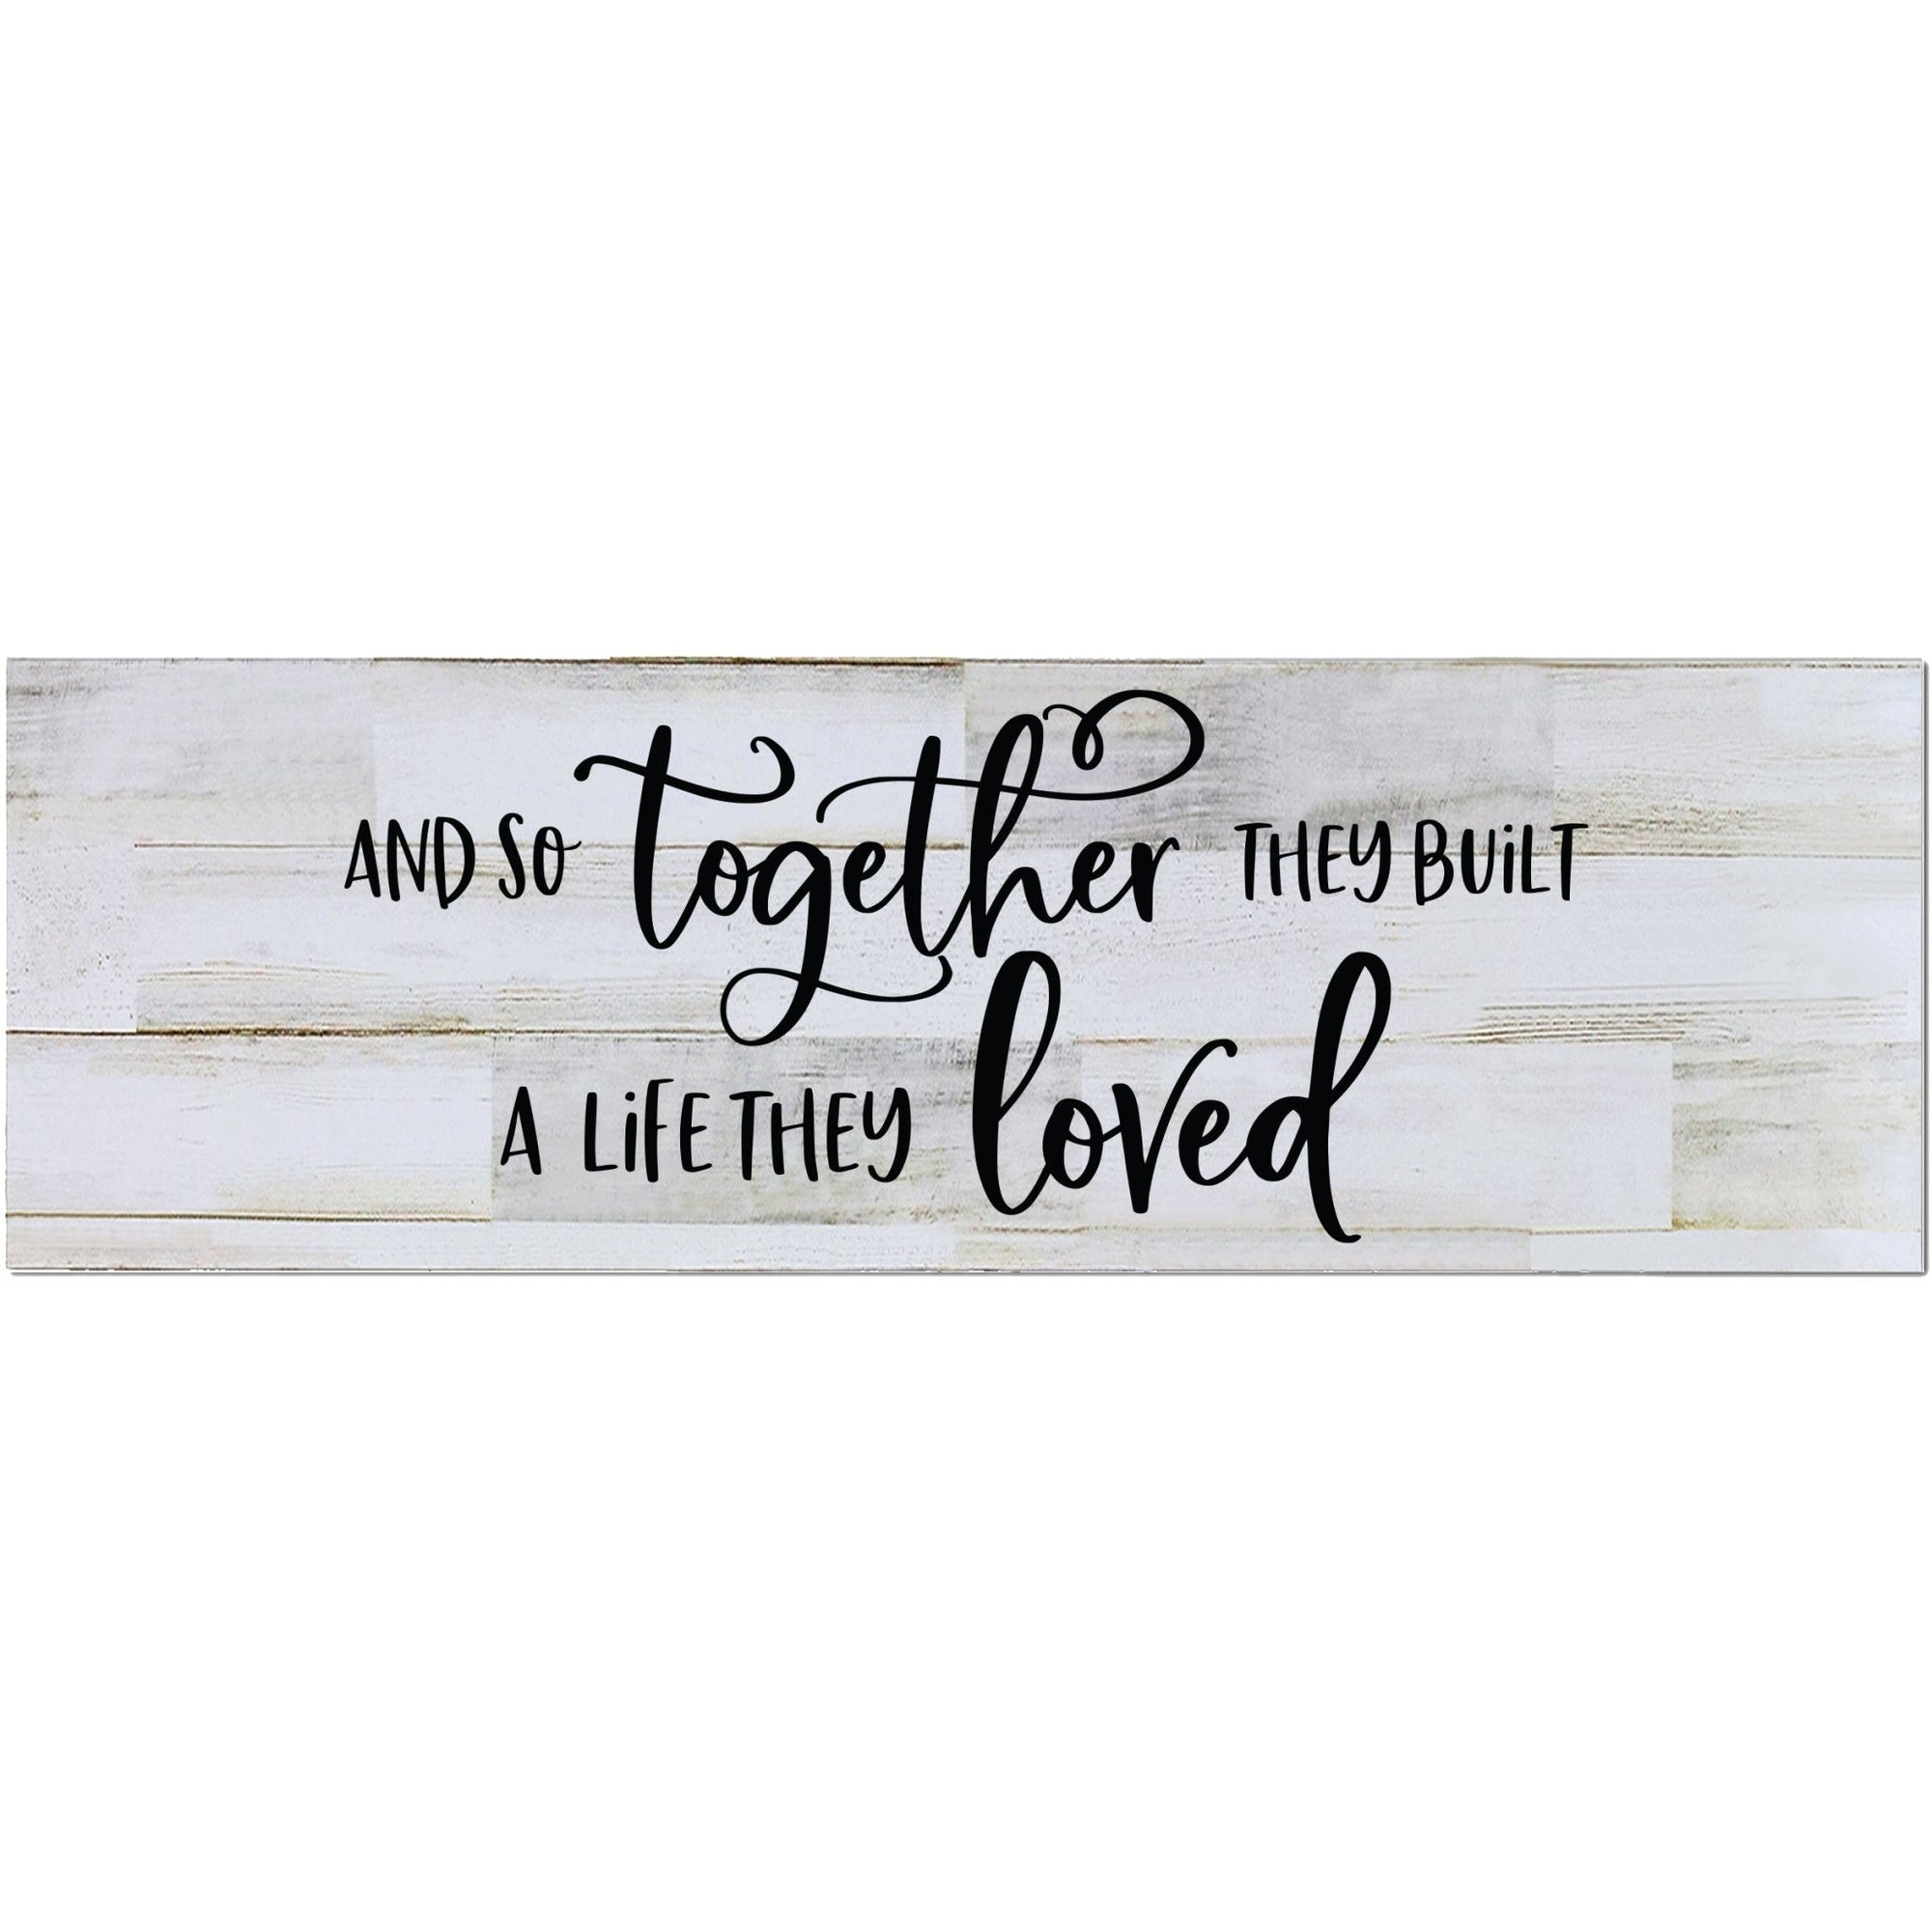 Modern Inspirational Wooden Wall Art Hanging Plaque 22.5x6 - And So Together - for Family and Home Decorations - LifeSong Milestones